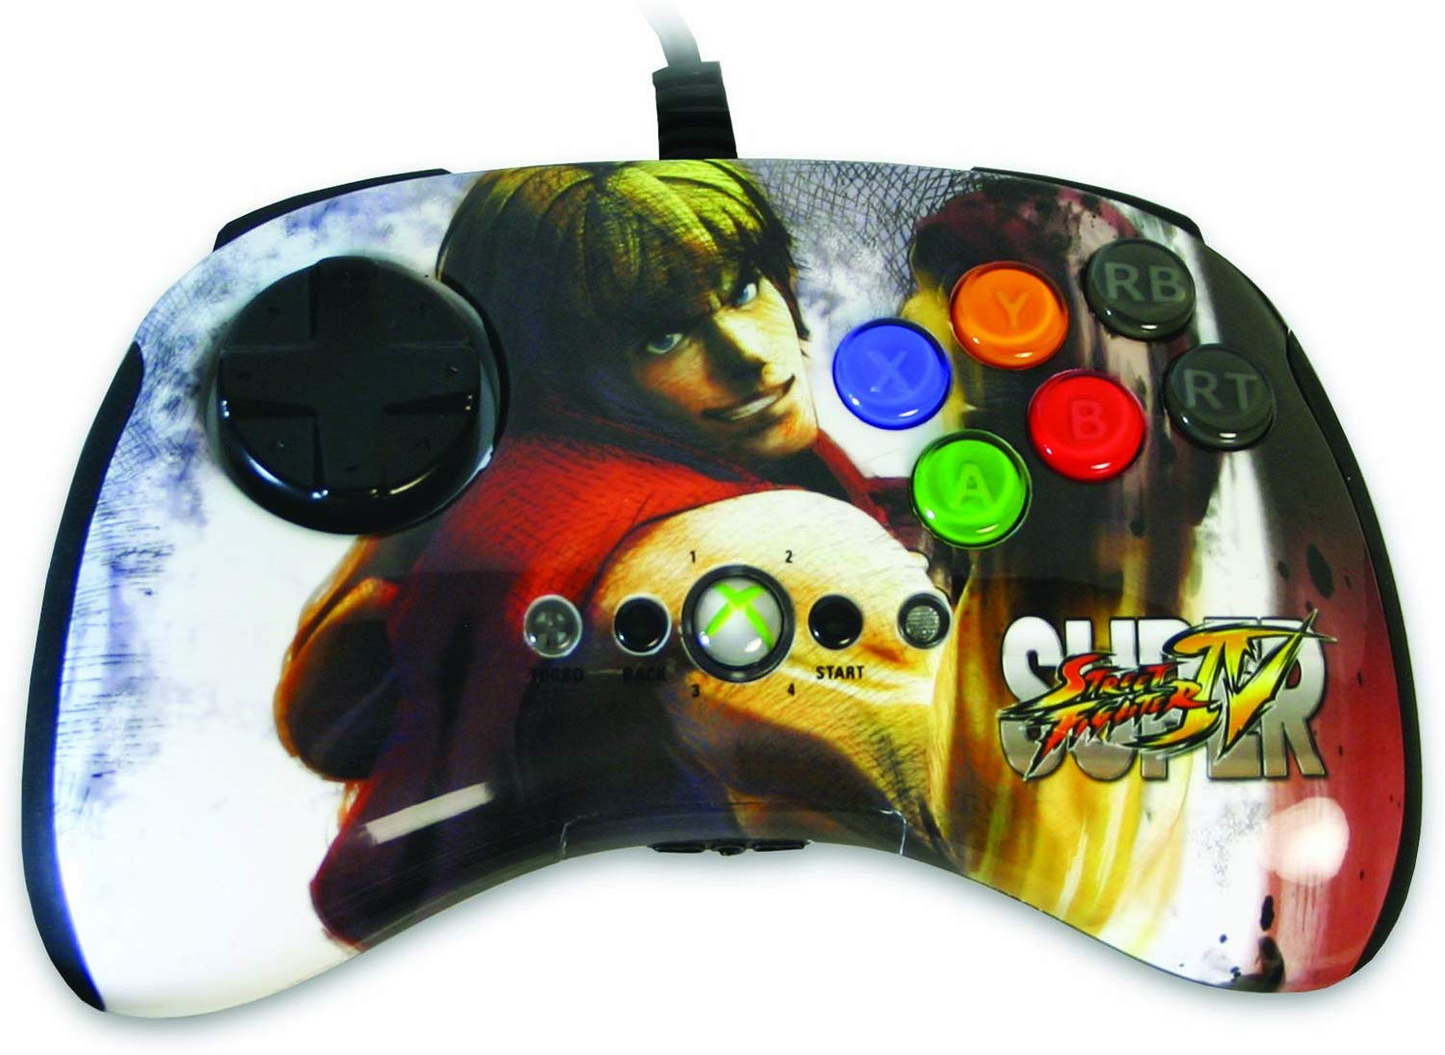 Wired Super Street Fighter IV FightPad - Xbox 360